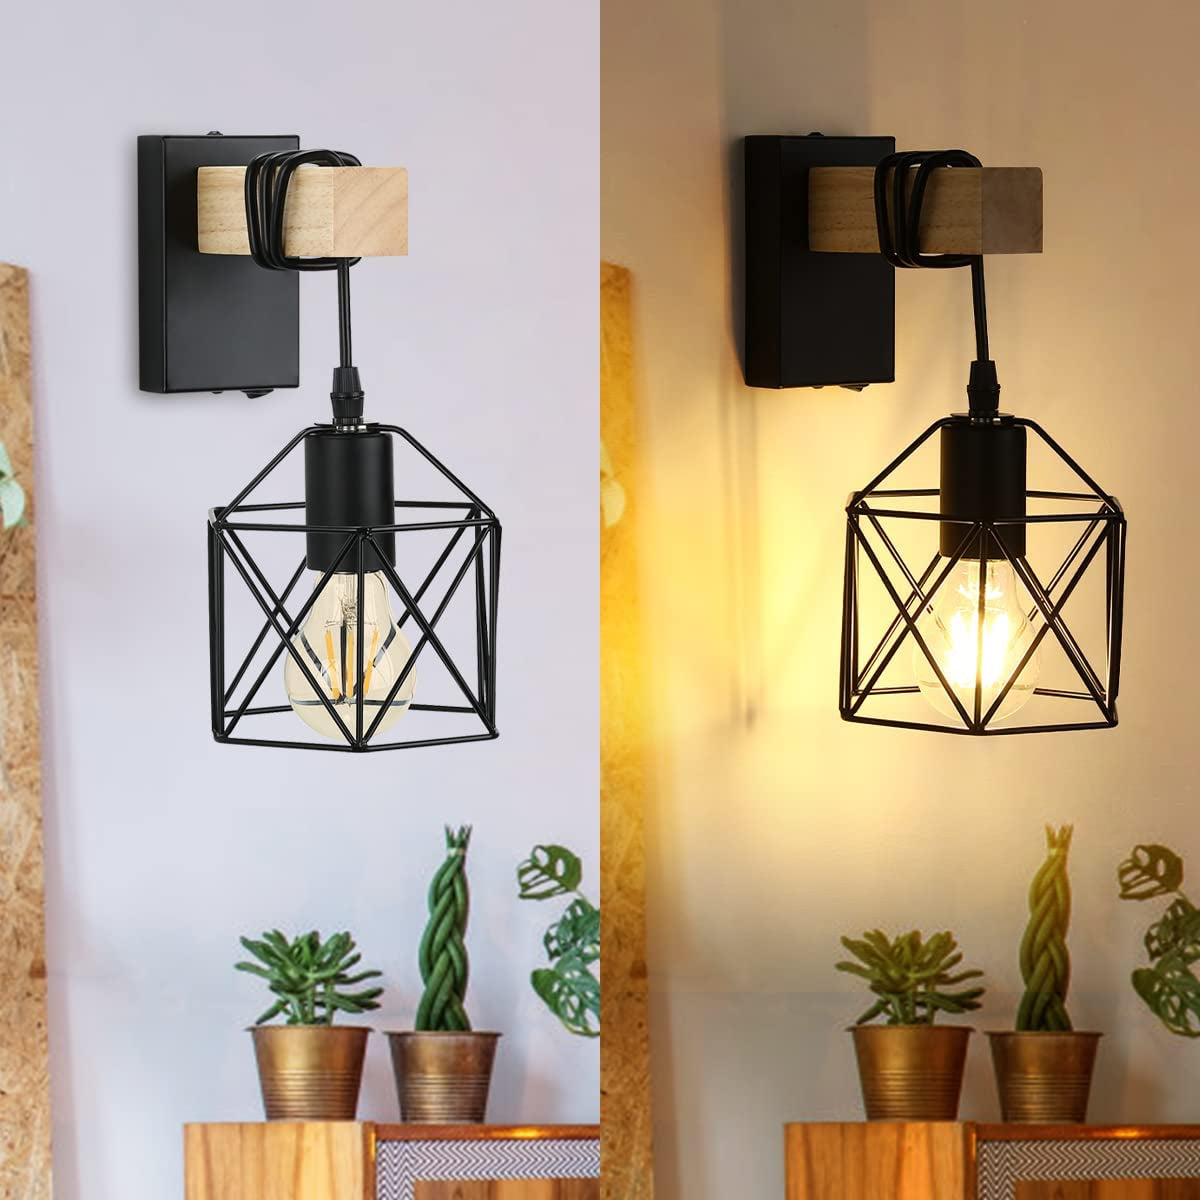 Industrial Wall Lights Indoor with Switch, Vintage Wooden Wall Lamp, E27 Black Cage Wall Lights, Wall Sconces Indoor for Farmhouse, Living Room, Bedroom, Hallway, Stairwell, Bar (2 Pack)